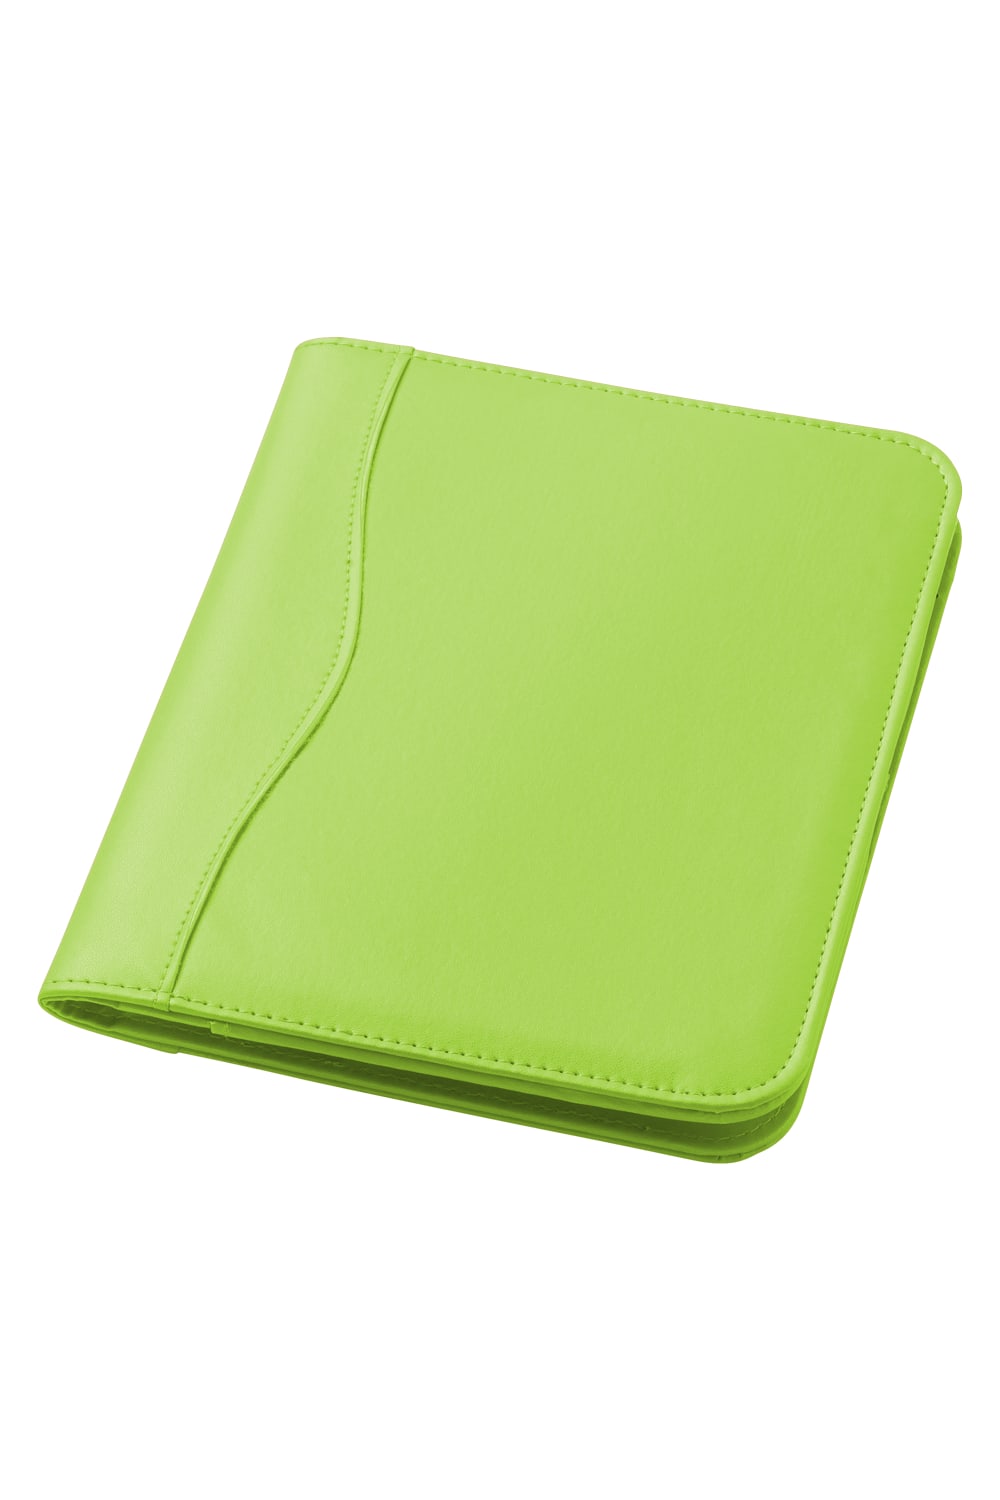 Bullet Ebony A5 Portfolio (Pack of 2) (Apple Green) (6.9 x 9.1 x 0.6 inches)